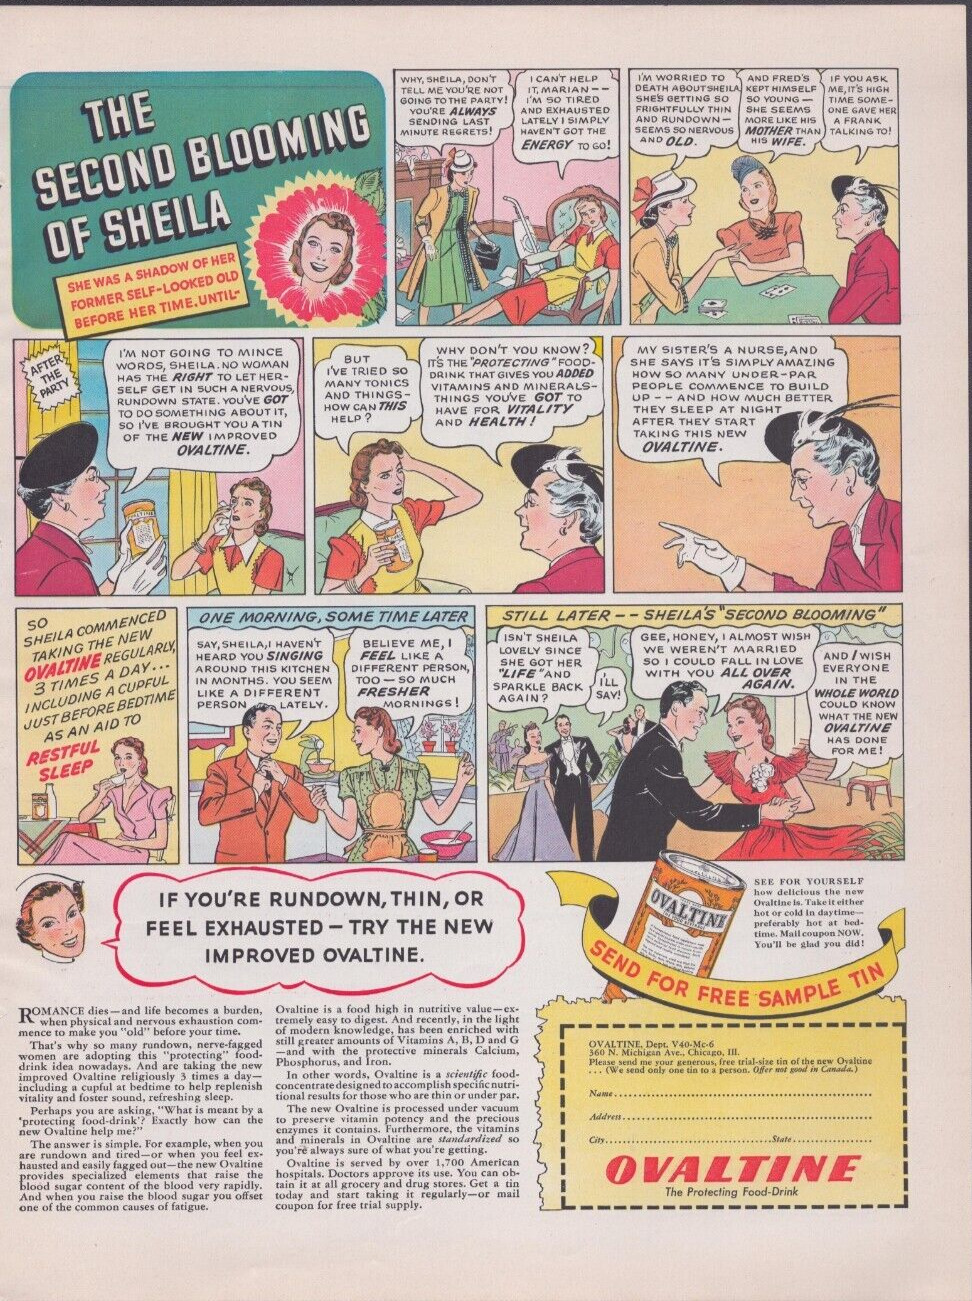 1940 Print Ad Ovaltine Drink The Second Blooming of Sheila Cartoon Illustration